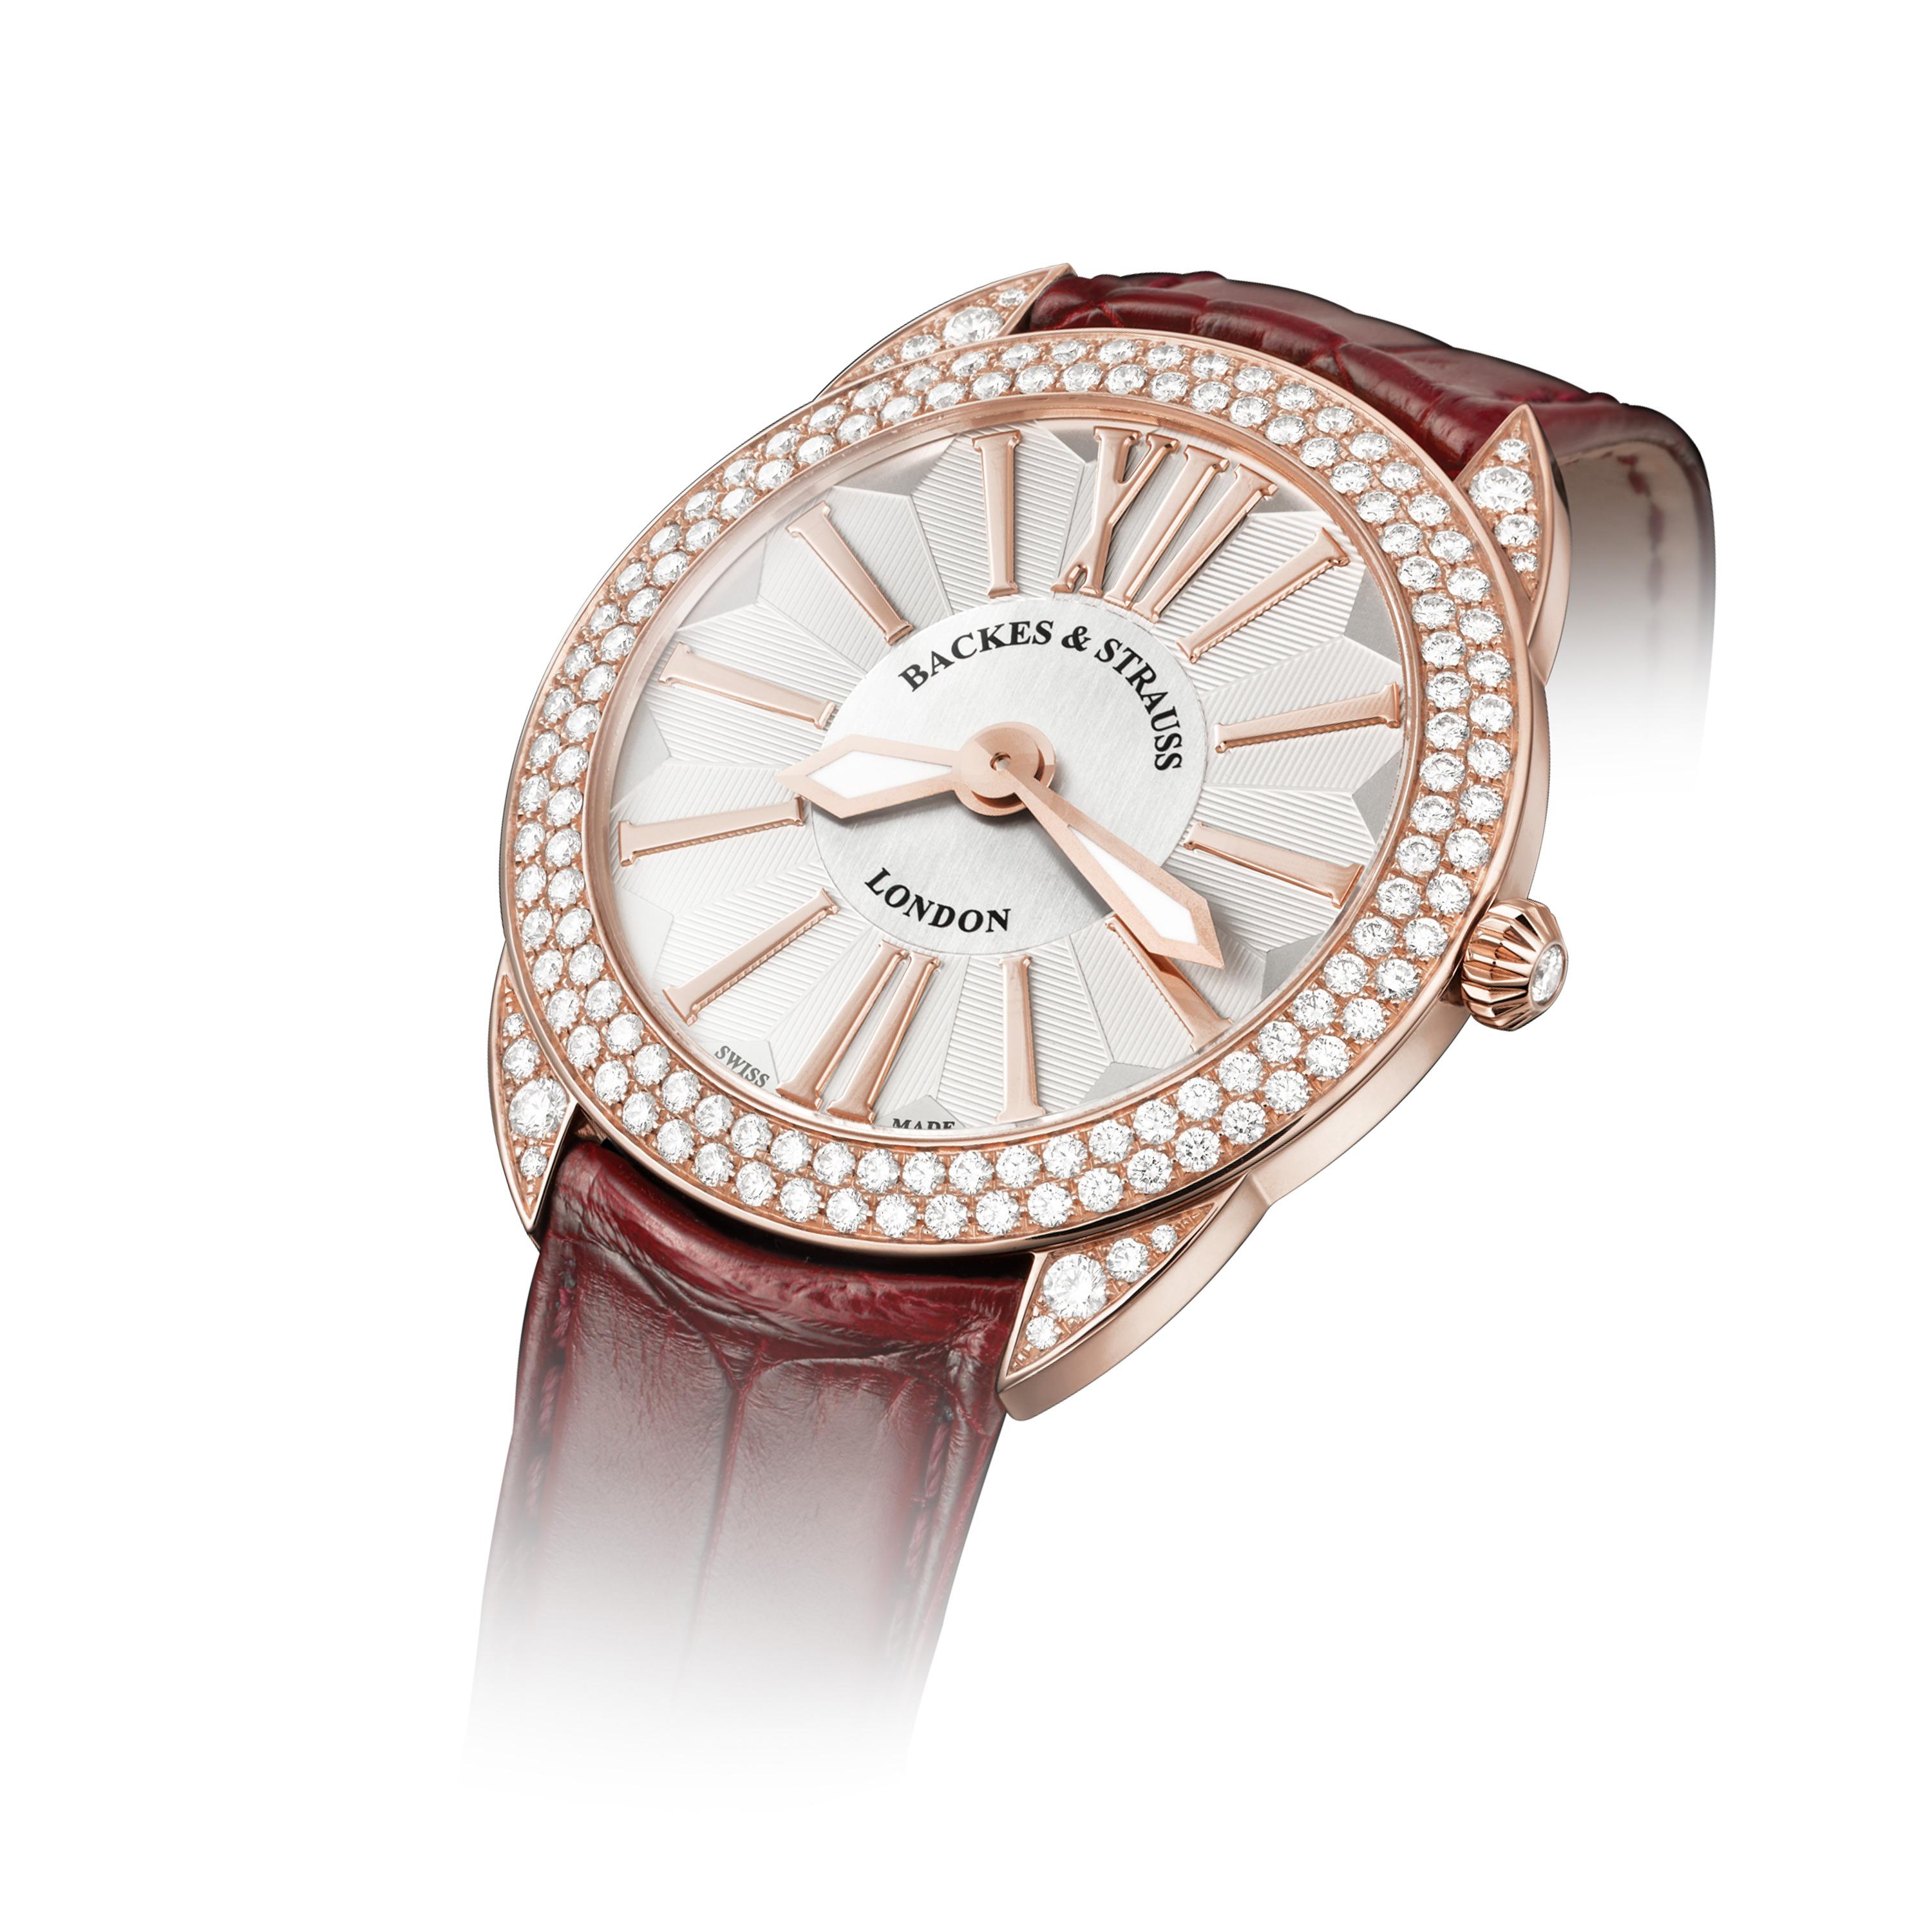 The Piccadilly Renaissance 33 is a luxury diamond watch for women crafted in 18kt Rose gold, featuring the white oval dial, mechanical movement. The case and crown are set with white Ideal Cut diamonds. It is a 33 mm slim watch with the leather